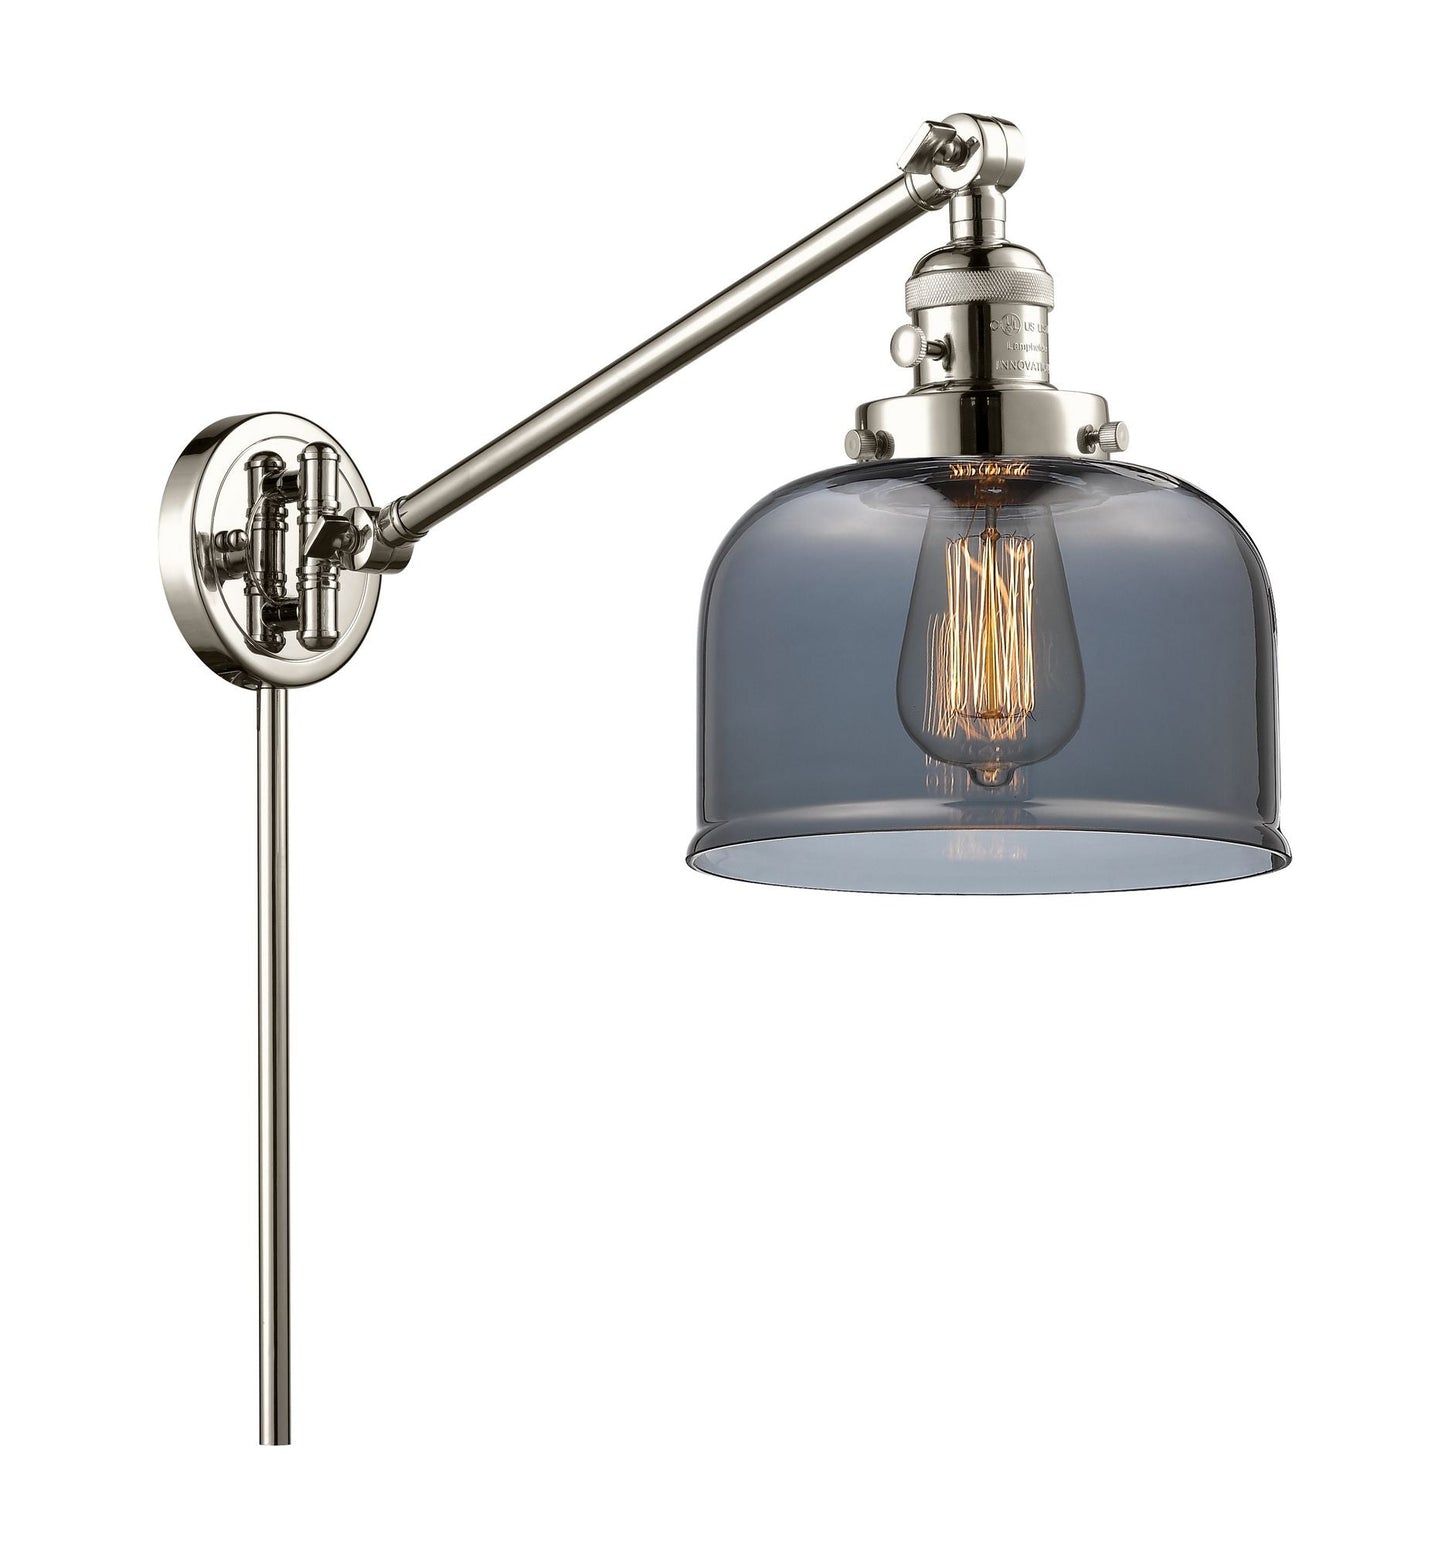 237-PN-G73 1-Light 8" Polished Nickel Swing Arm - Plated Smoke Large Bell Glass - LED Bulb - Dimmensions: 8 x 21 x 25 - Glass Up or Down: Yes